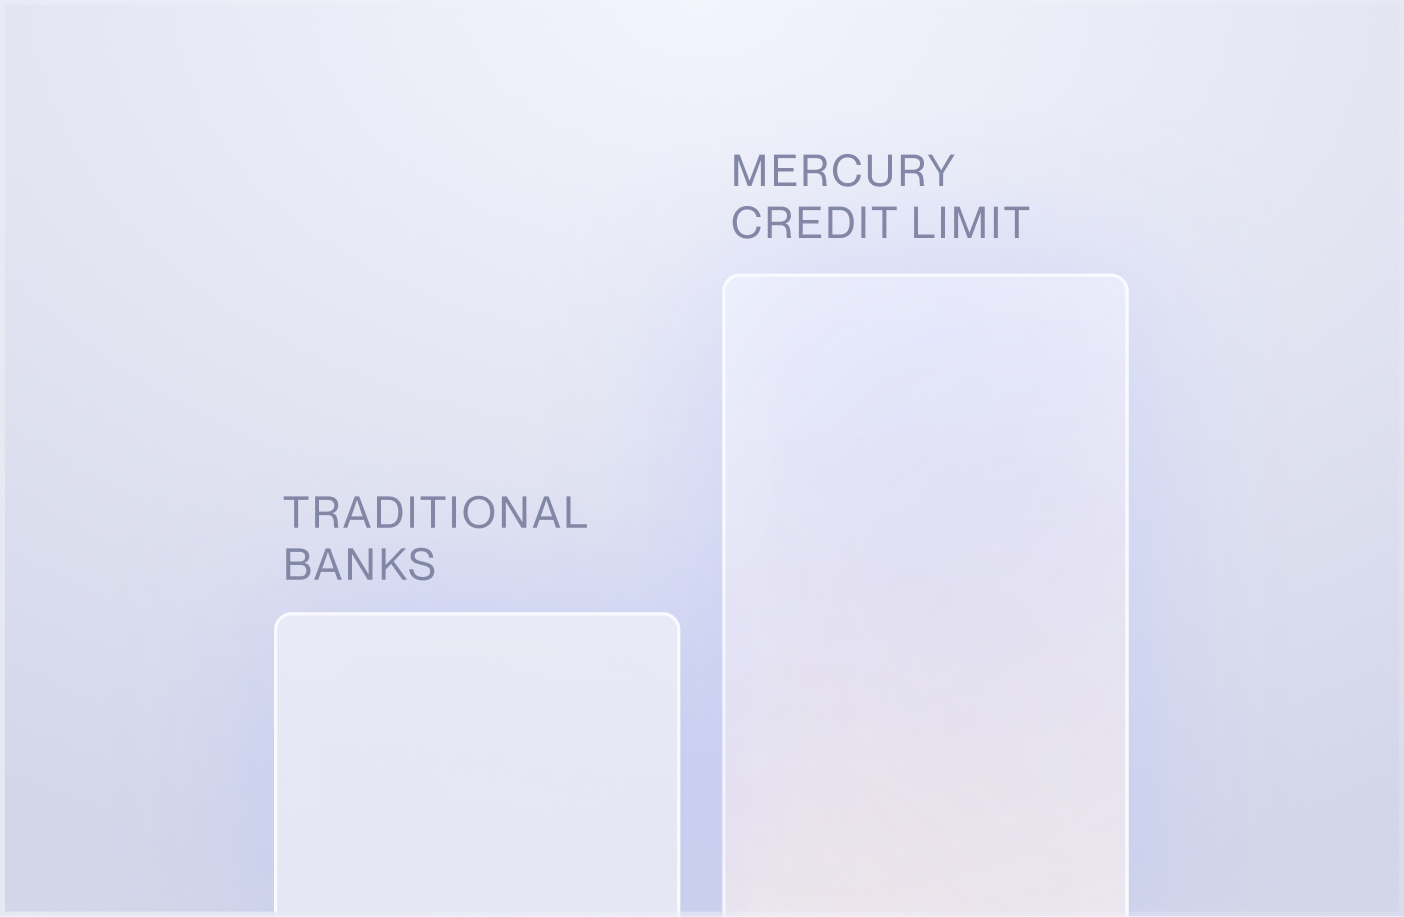 The Mercury credit limit is 20x that of traditional banks.